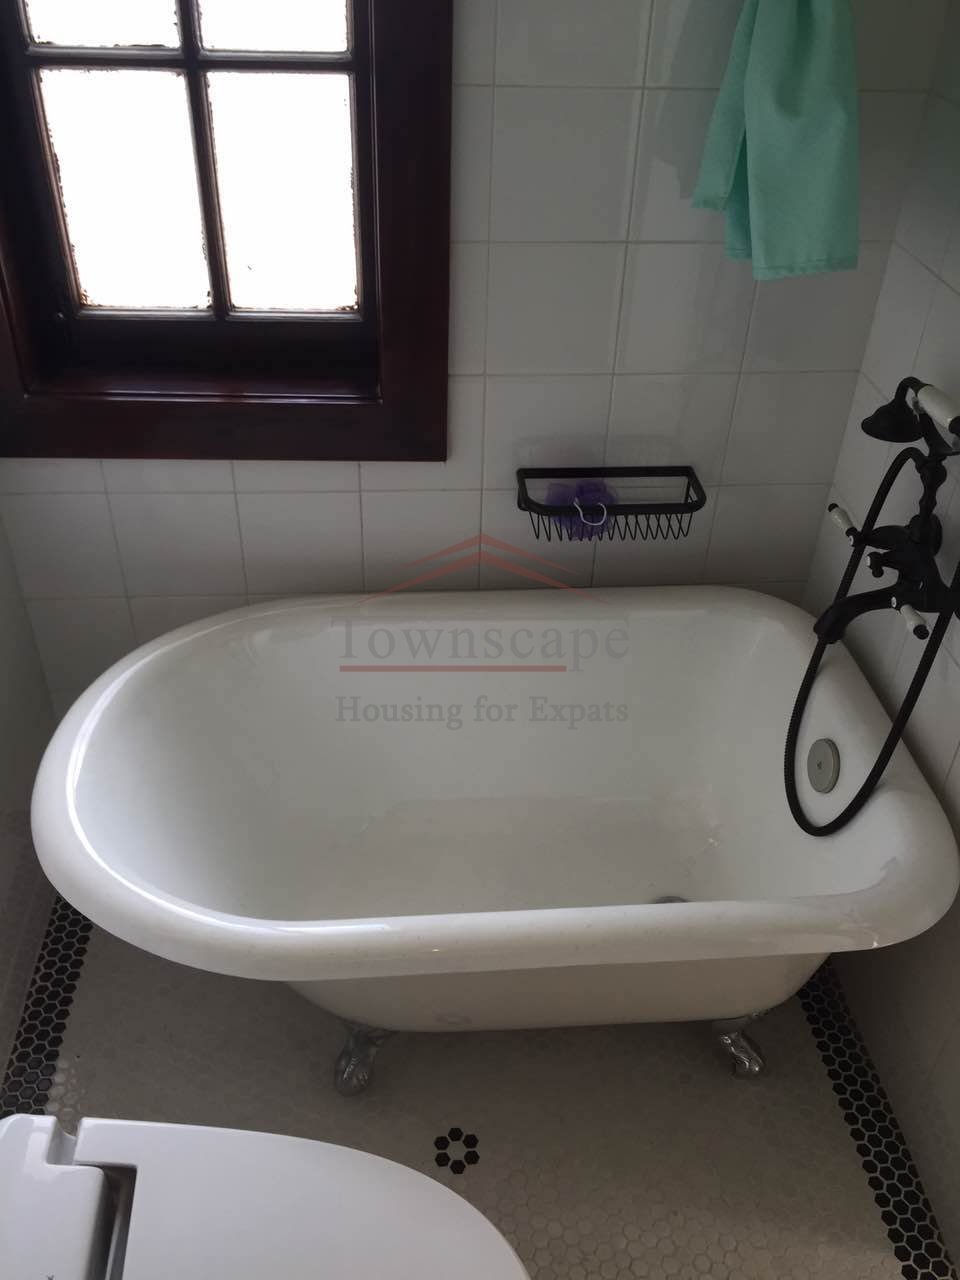 French Concession Luxury 1 bed Lane House in Shanghai French Concession